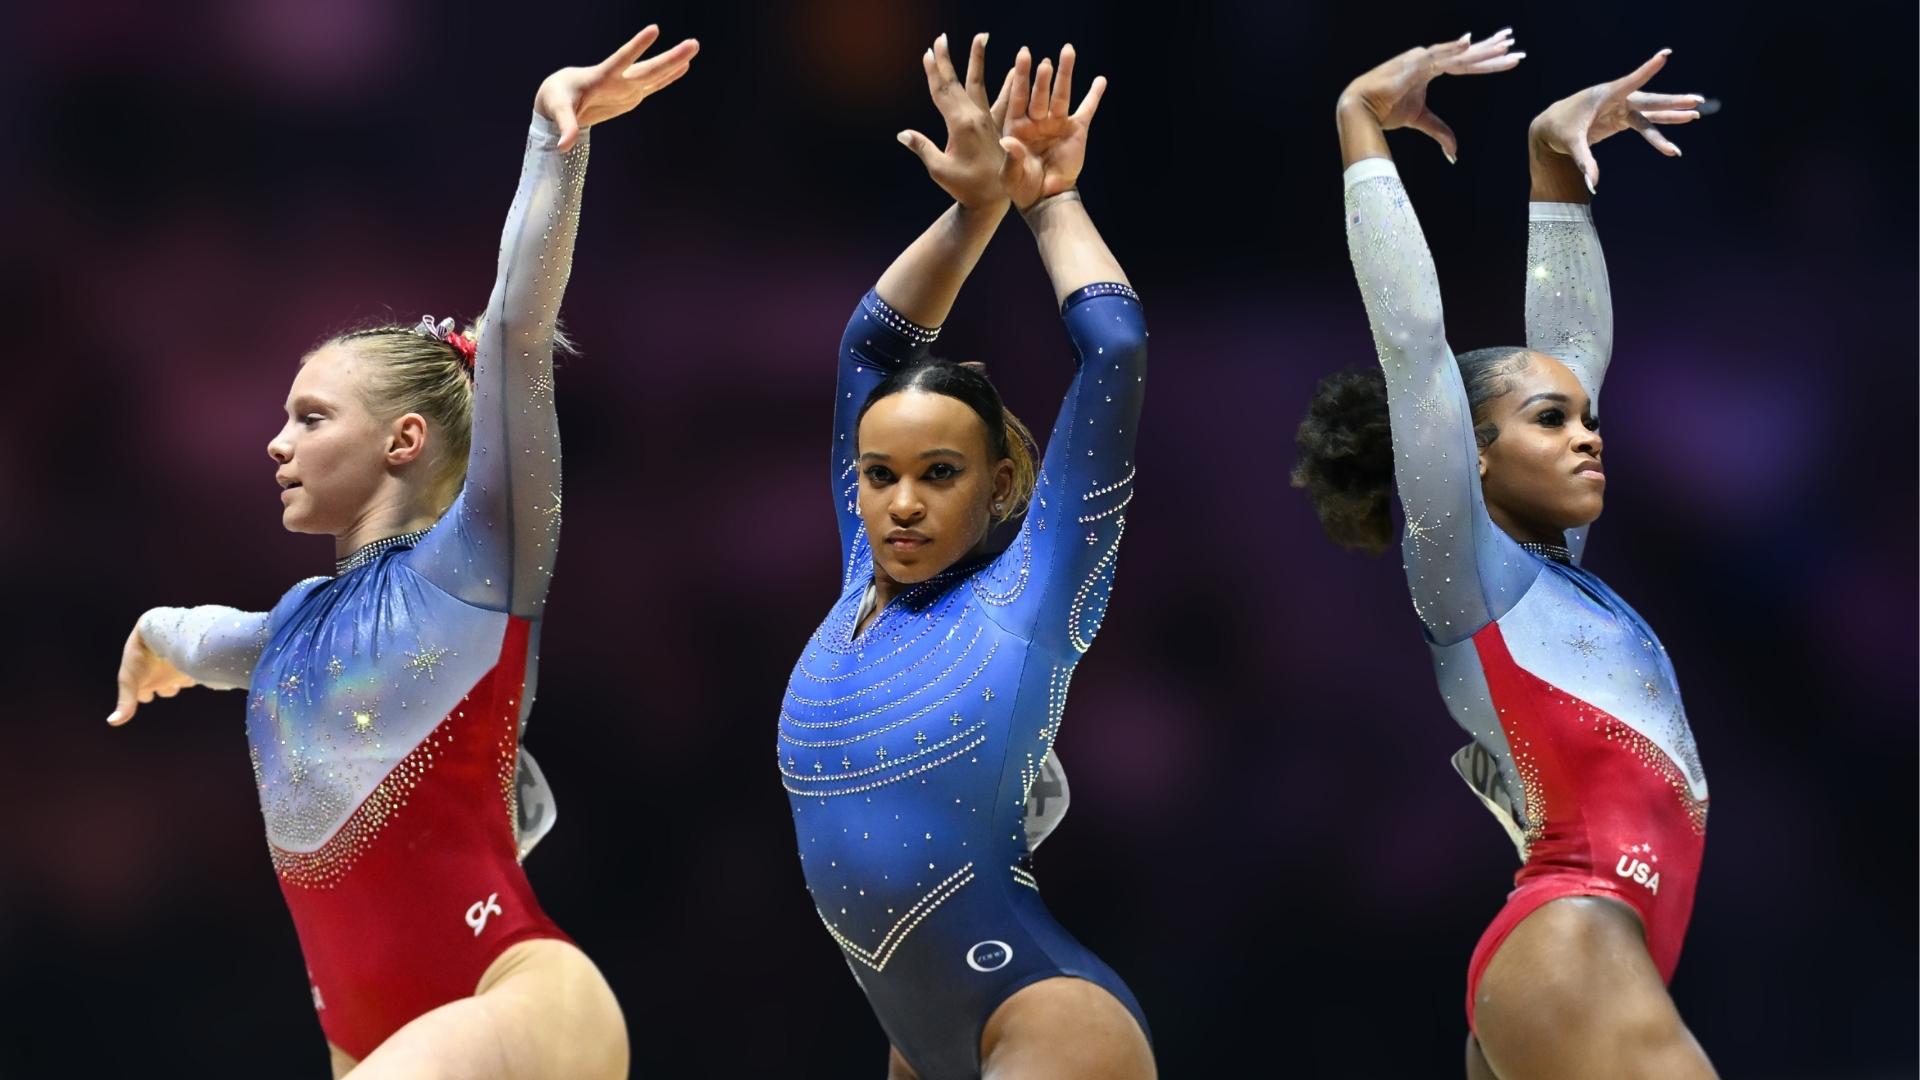 Brazil's Rebeca Andrade (center), USA's Shilese Jones (right), and USA's Jade Carey (left) were the top 3 qualifiers to the women's all-around final at the 2022 World Gymnastics Championships.